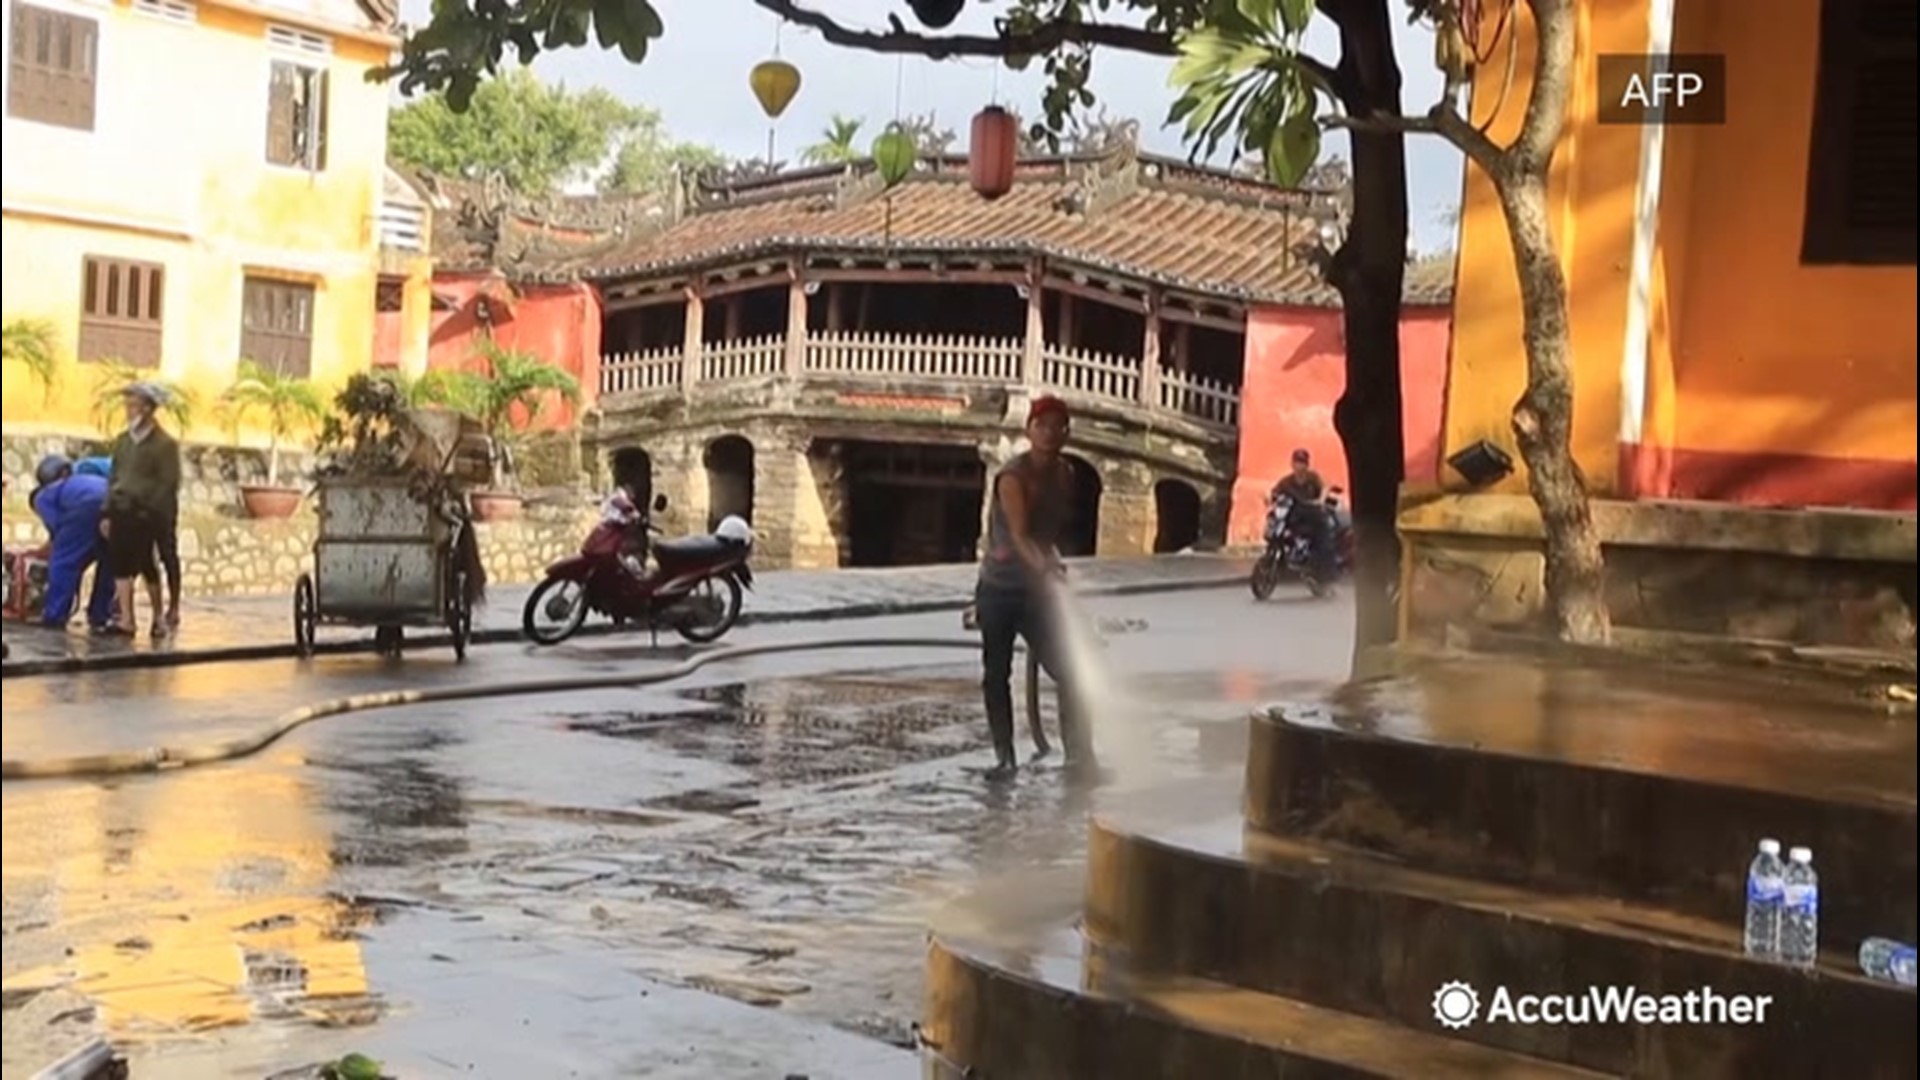 Residents removed mud and debris from the streets and streams of Hoi An, Vietnam, on Oct. 30 after Typhoon Molave  caused flash flooding in the city.